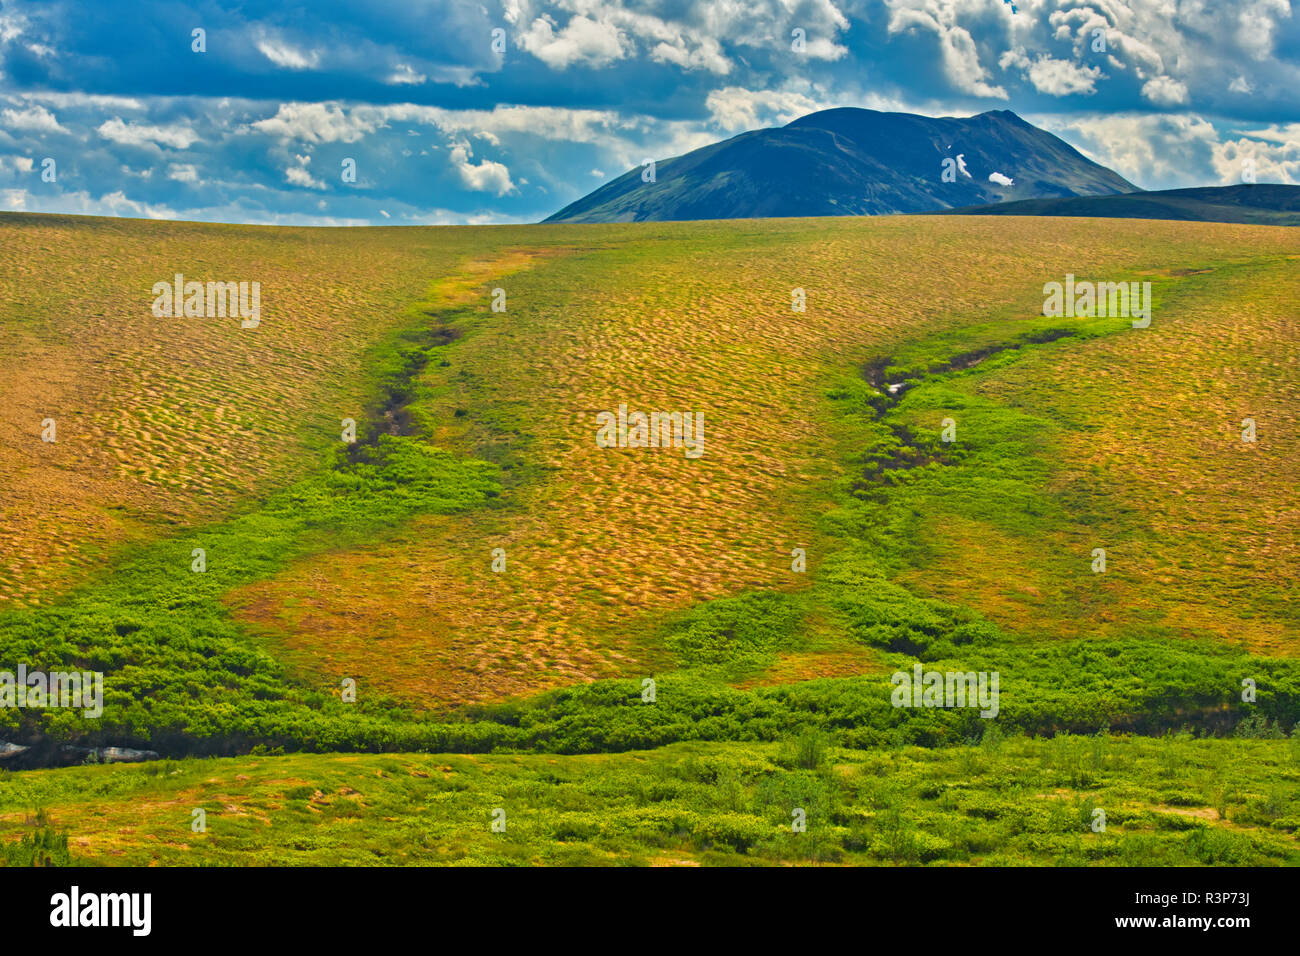 Canada, Northwest Territories. Landscape of Dempster Highway. Stock Photo